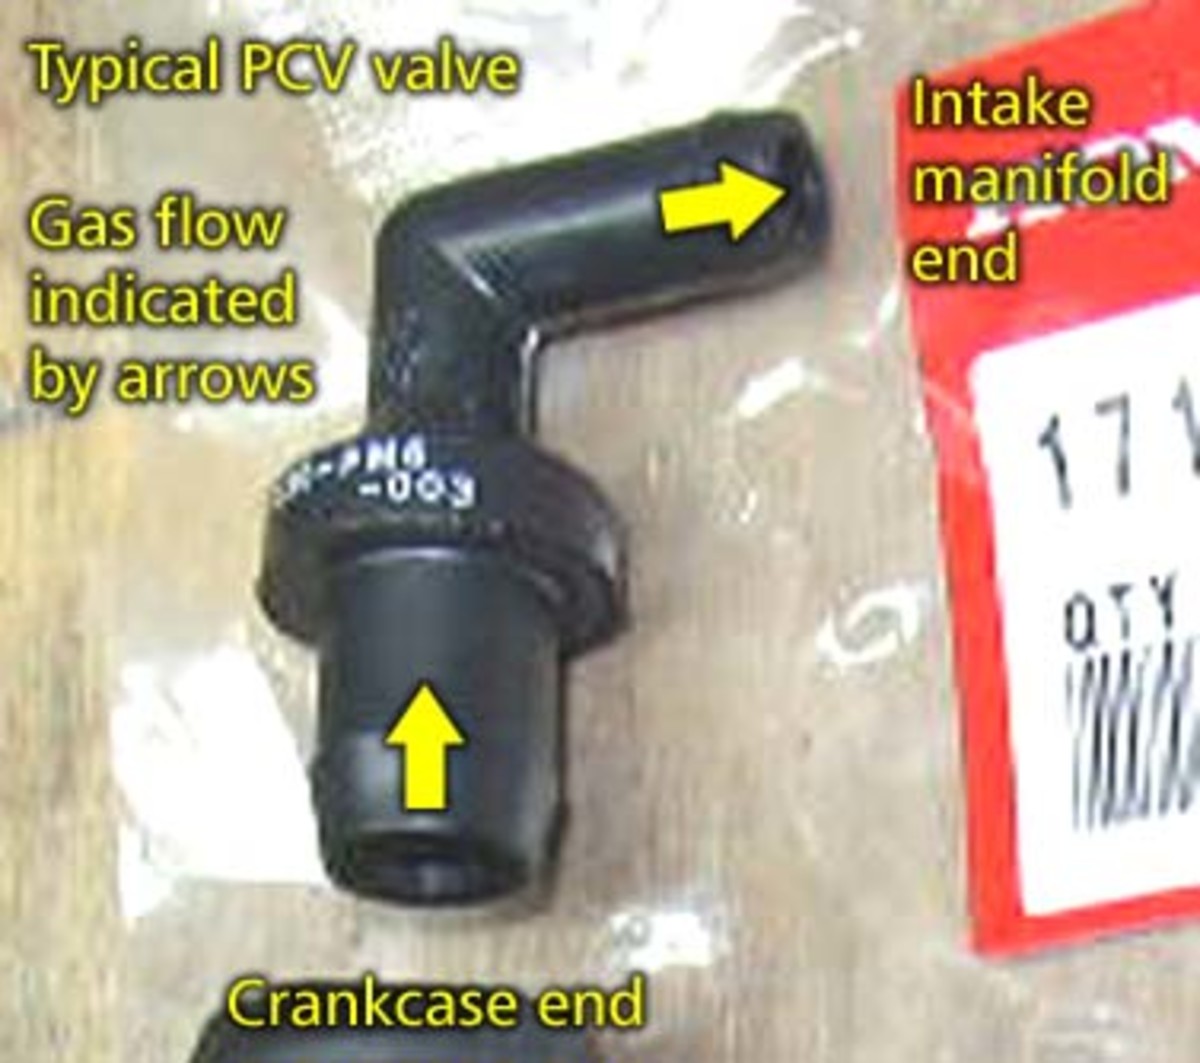 Check the PCV valve and related hoses.